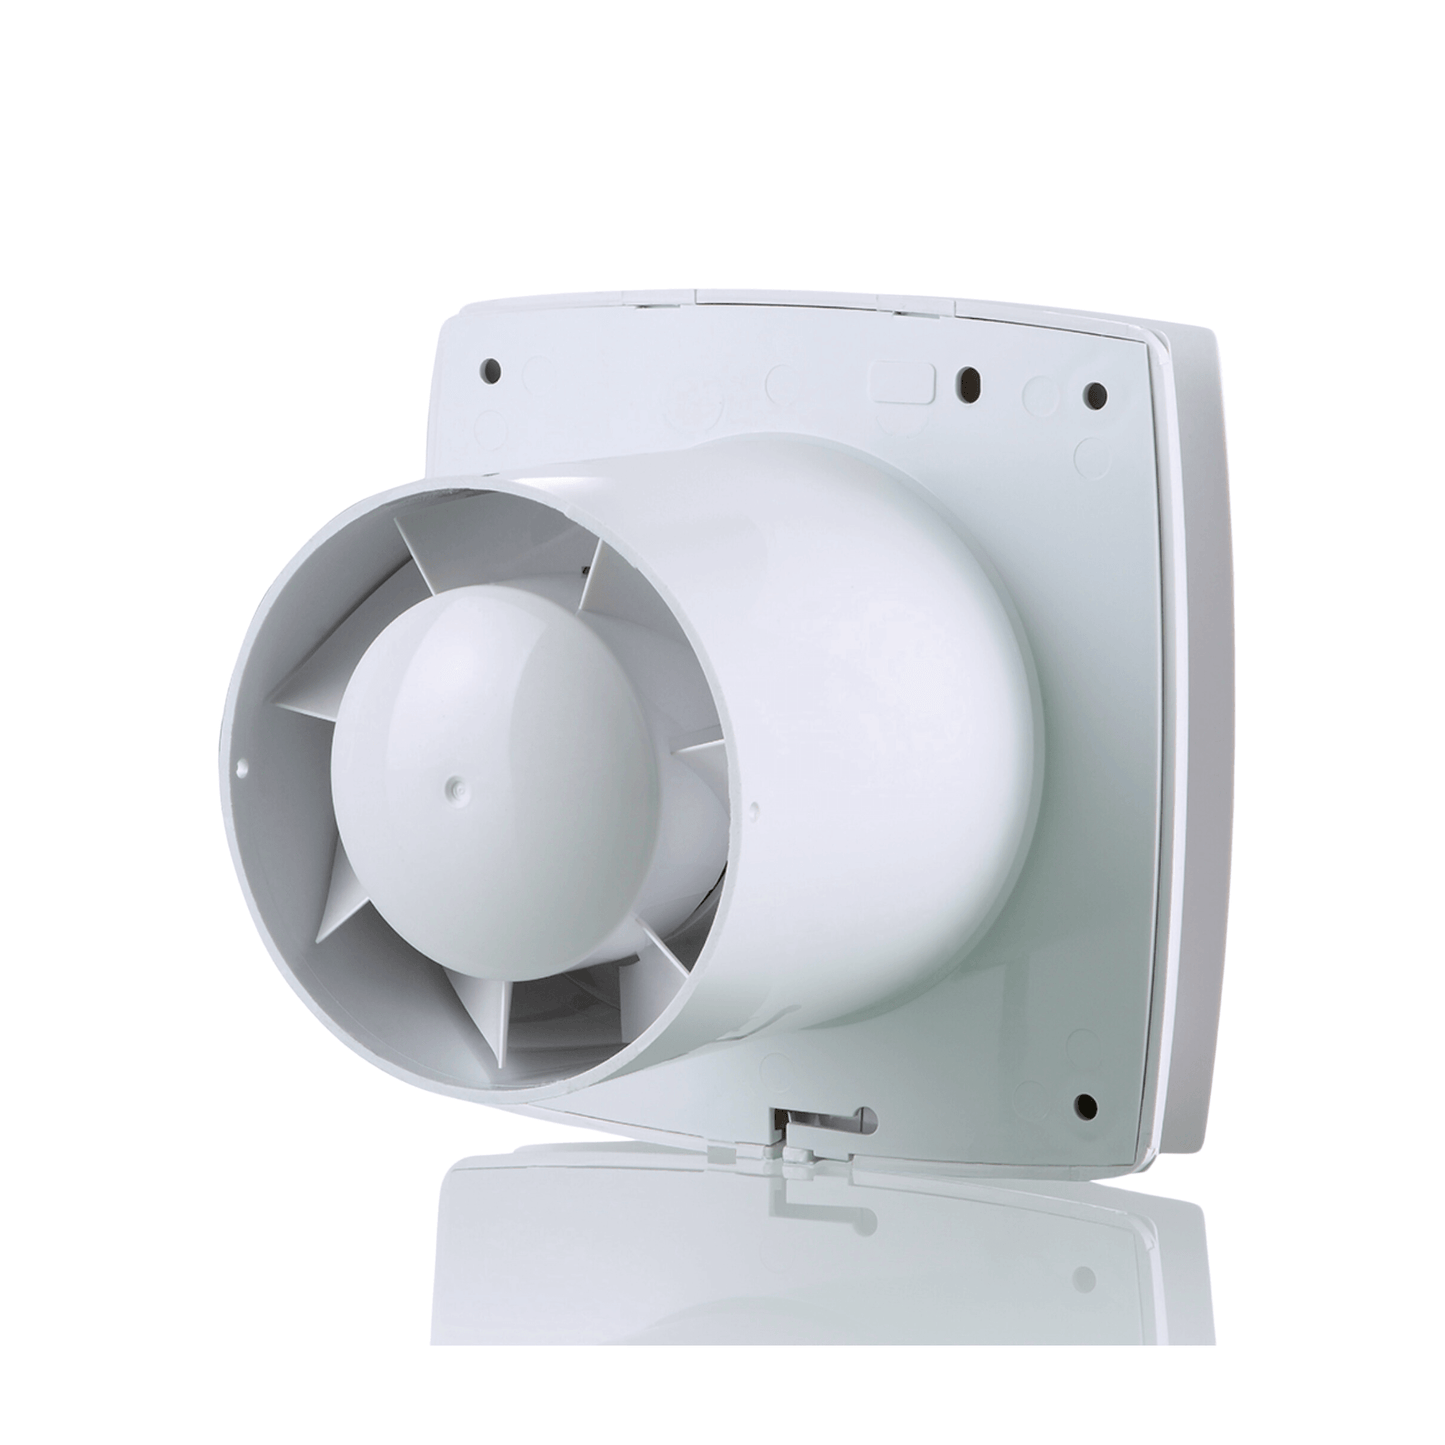 Vents 100 LD Axial Extract Fan